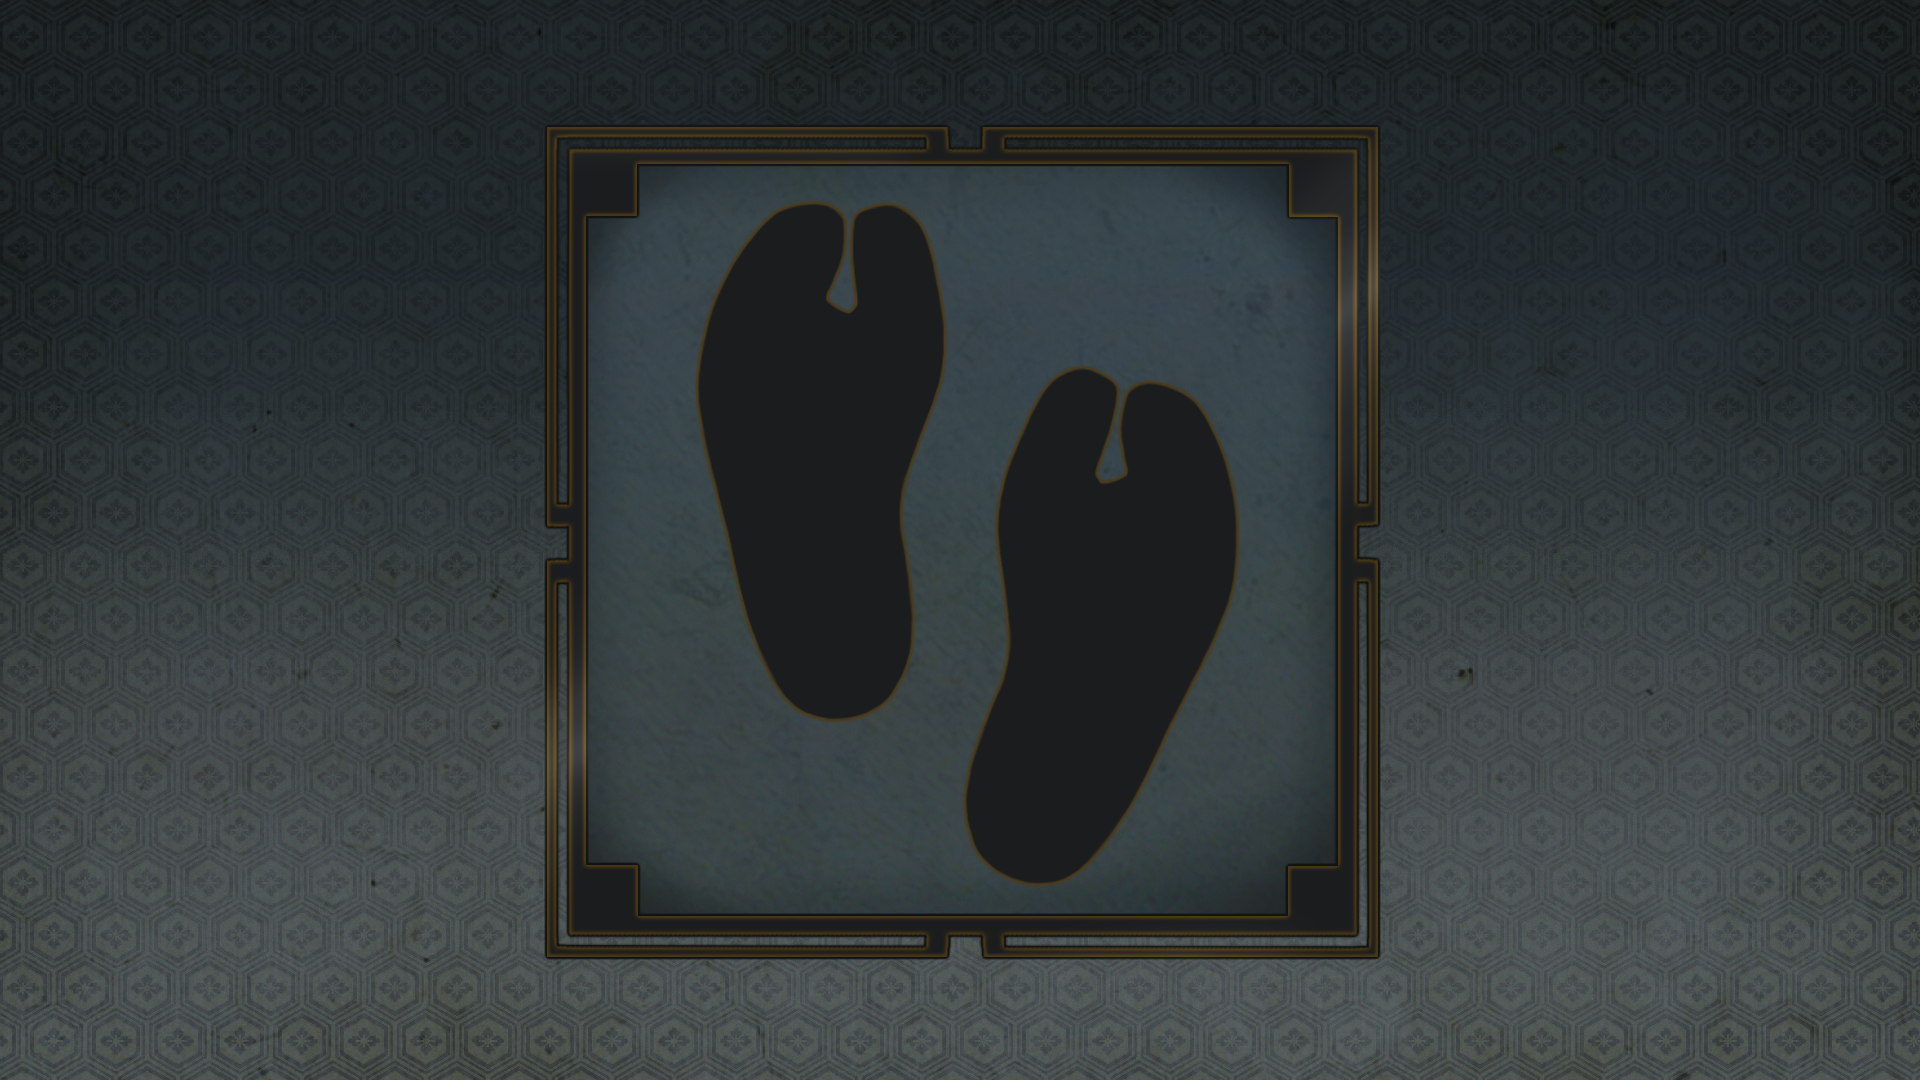 Icon for First Steps